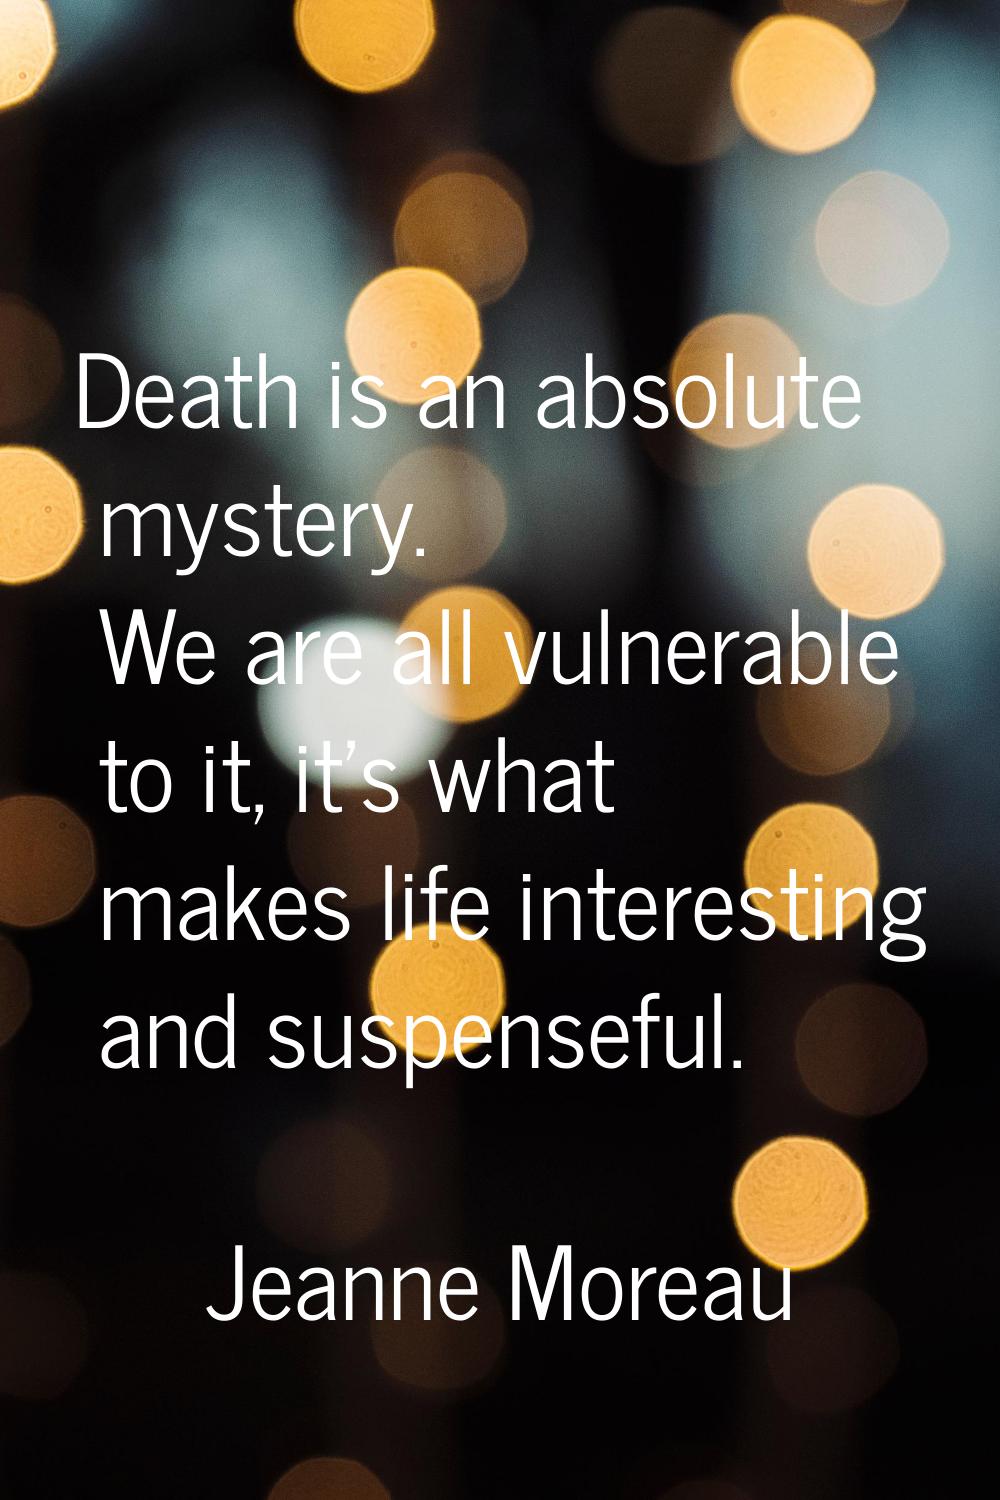 Death is an absolute mystery. We are all vulnerable to it, it's what makes life interesting and sus